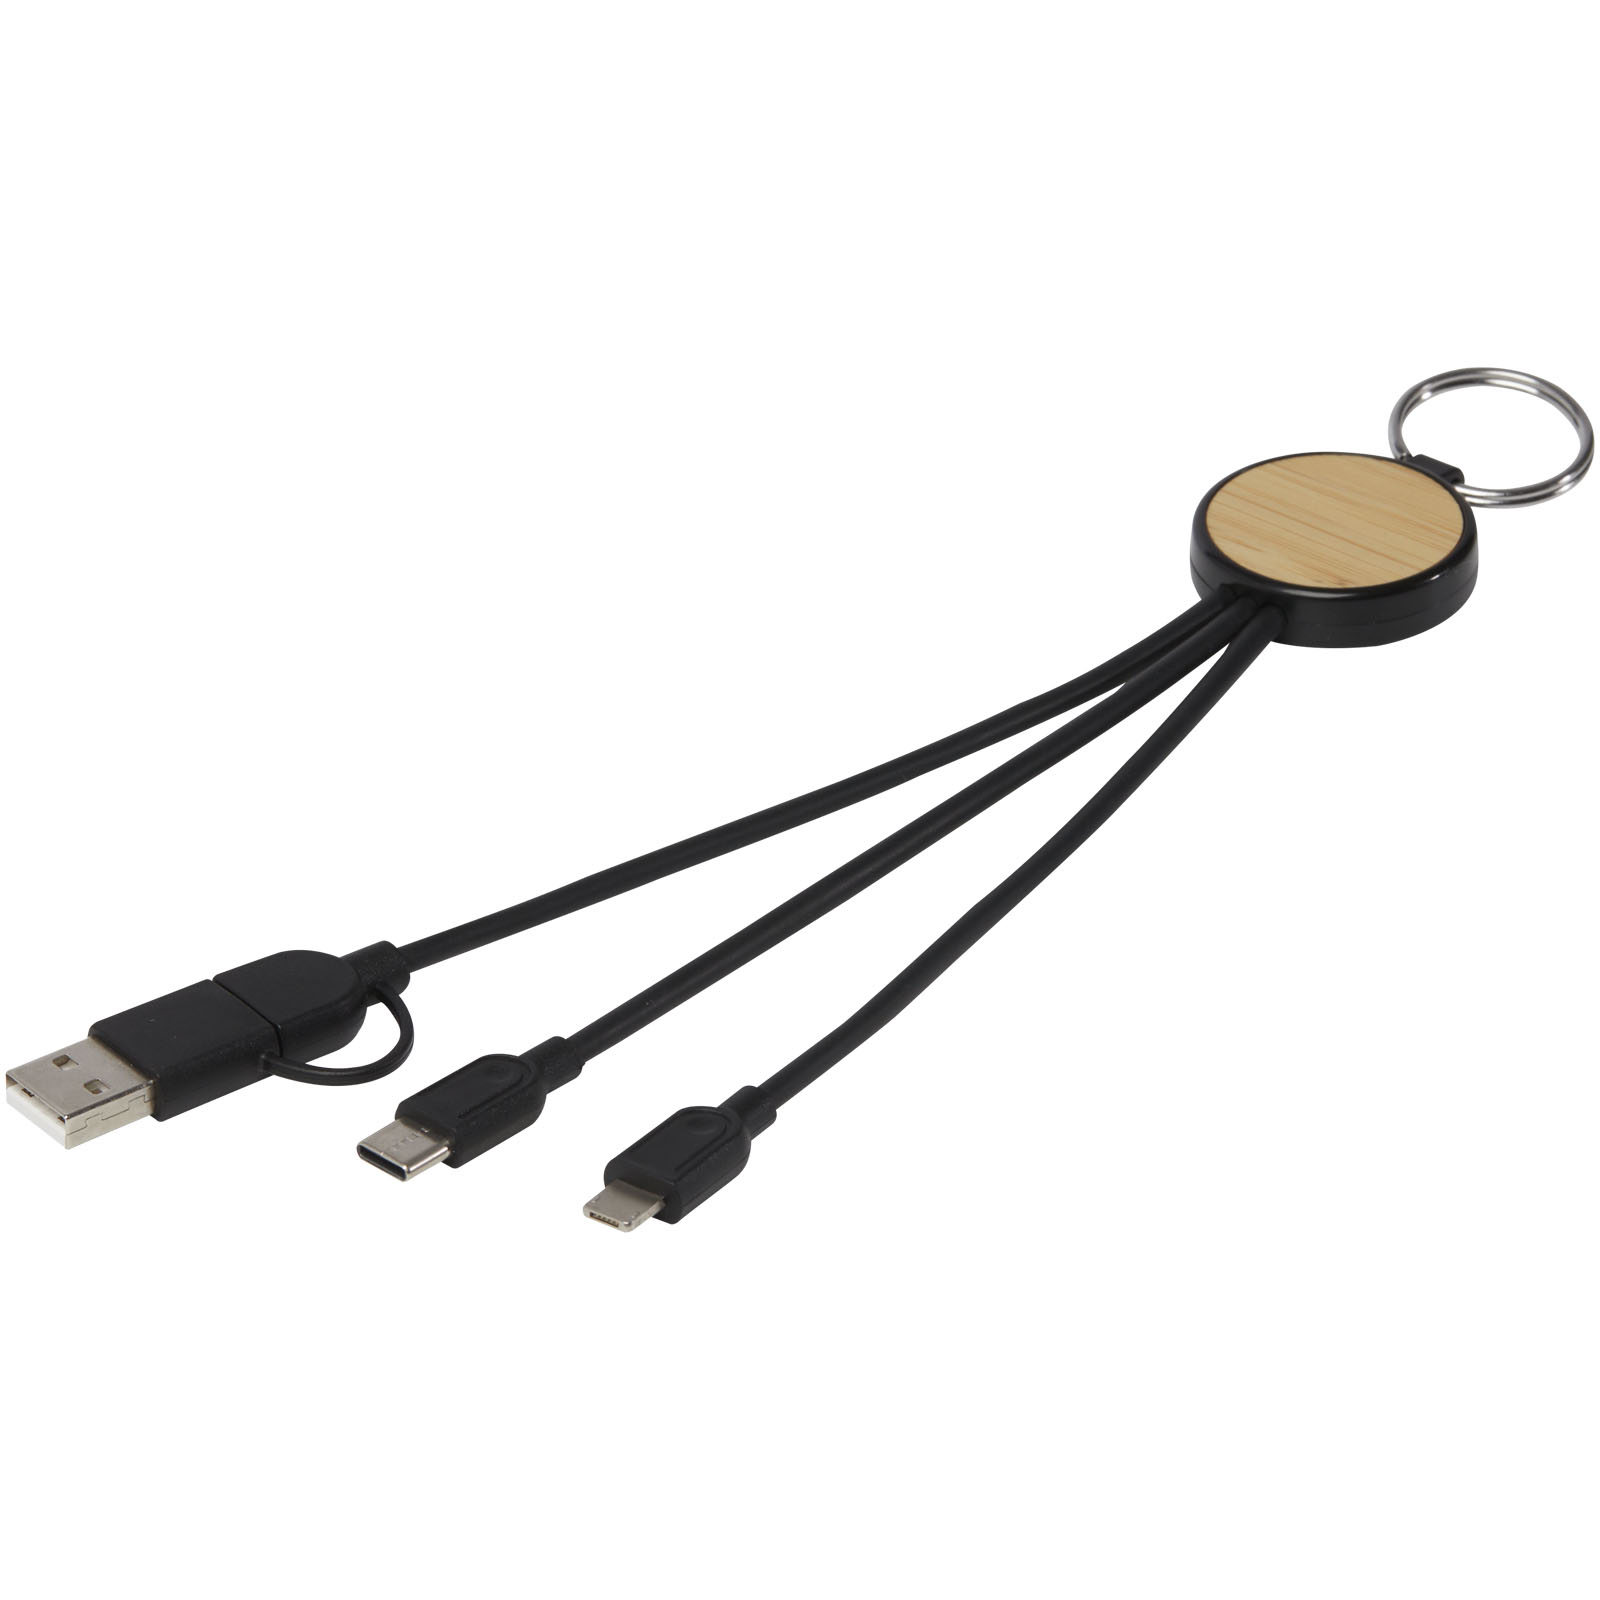 Technology - Tecta 6-in-1 recycled plastic/bamboo charging cable with keyring